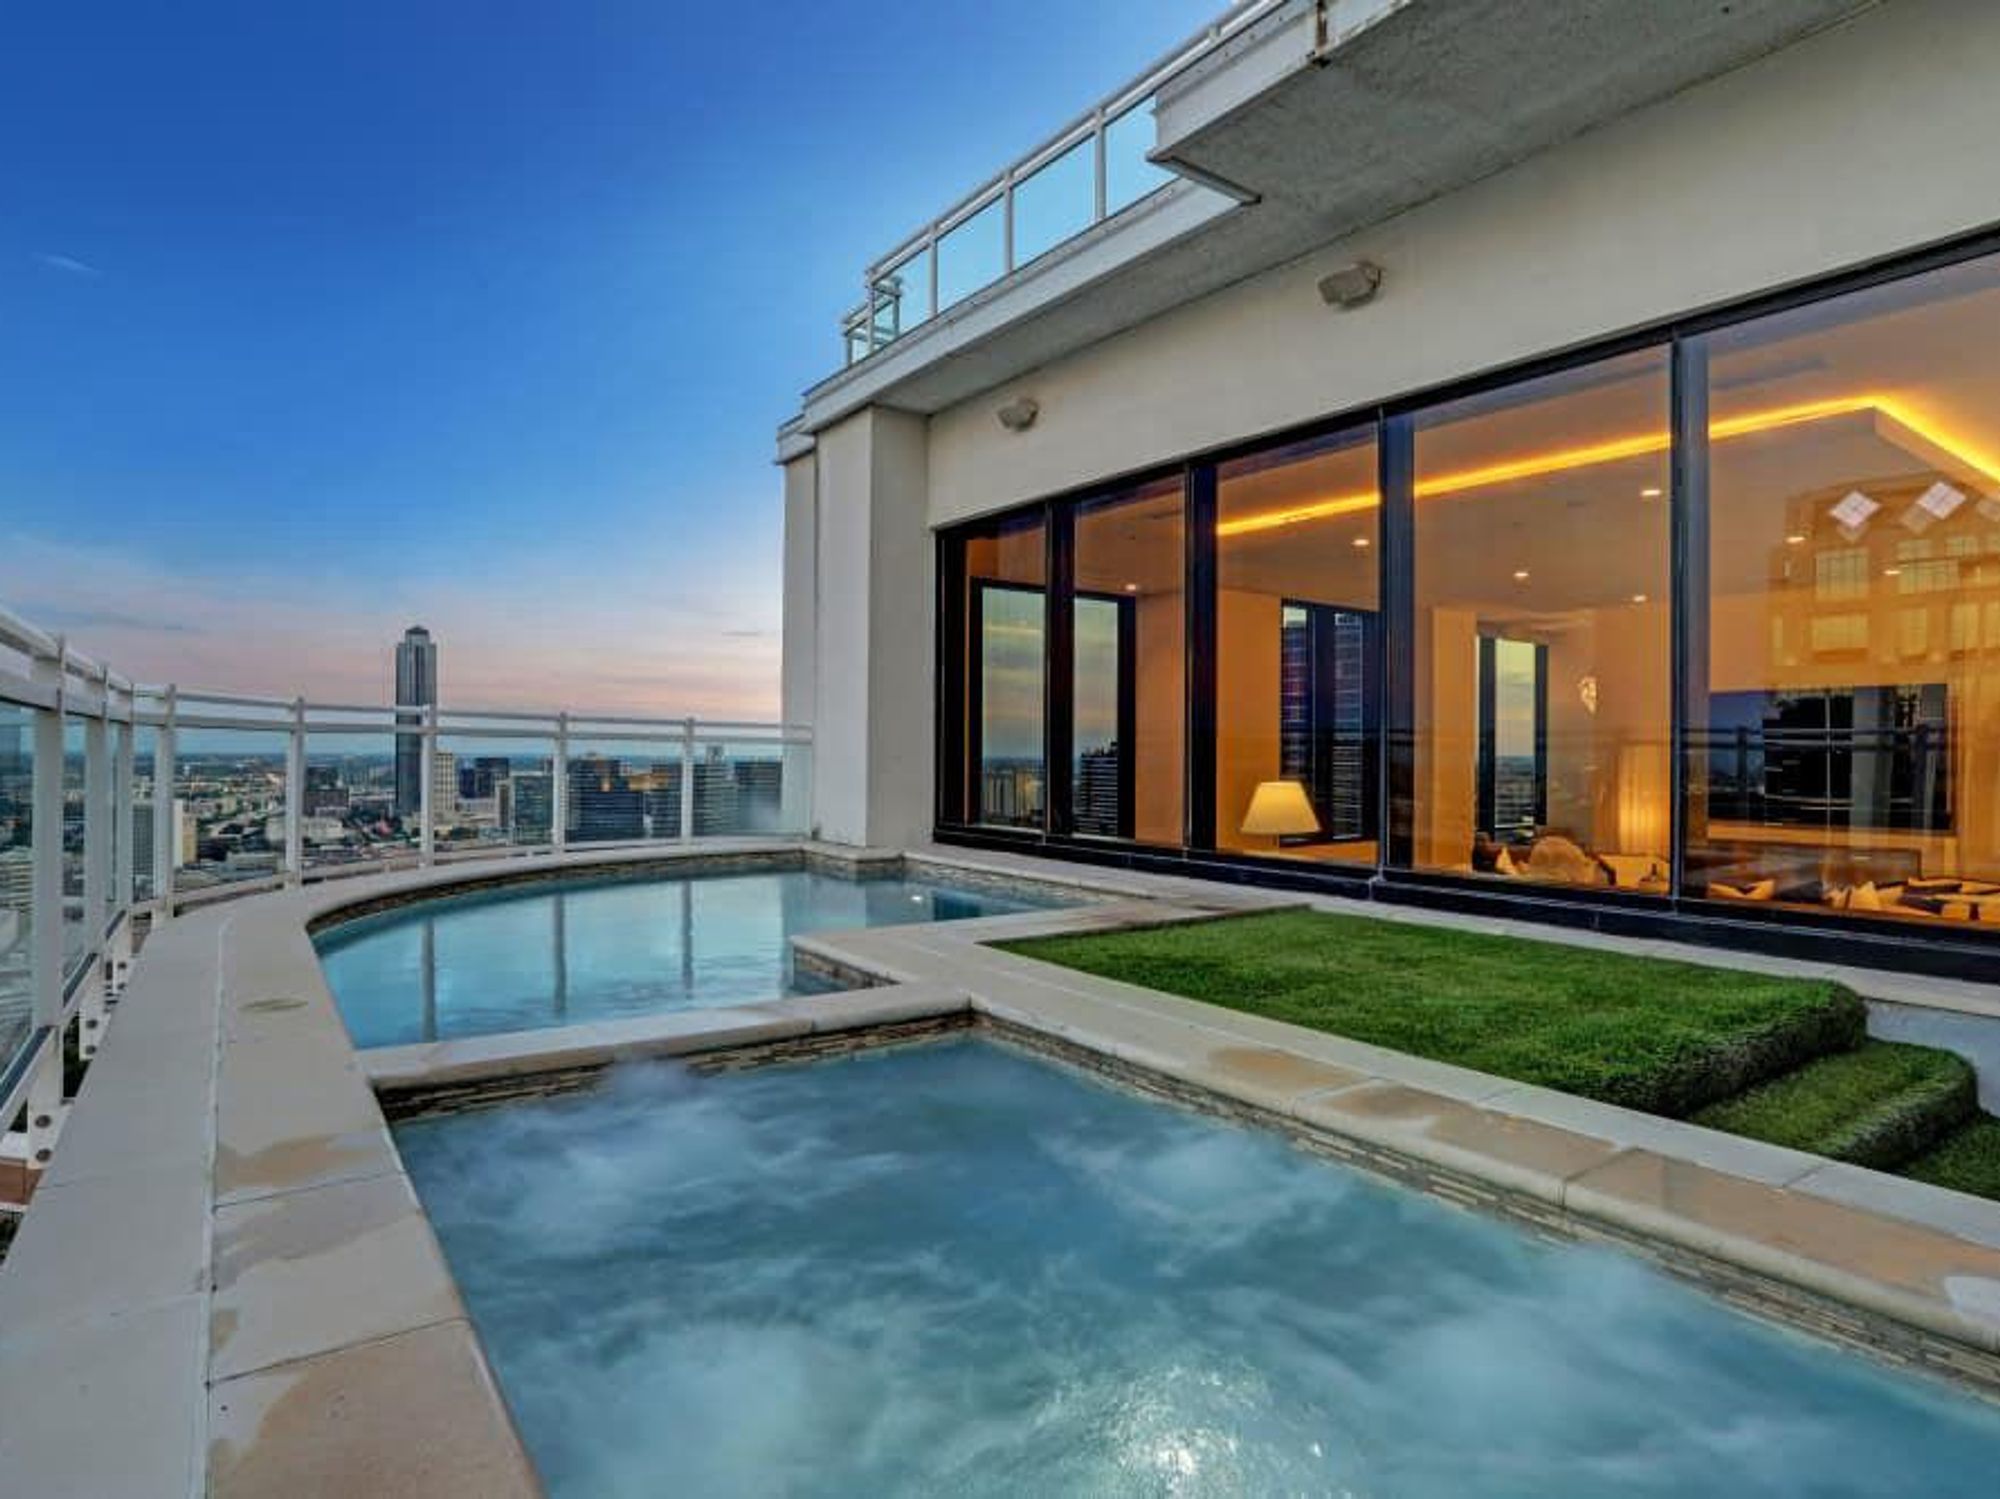 The outdoor space features a pool and sweeping views.